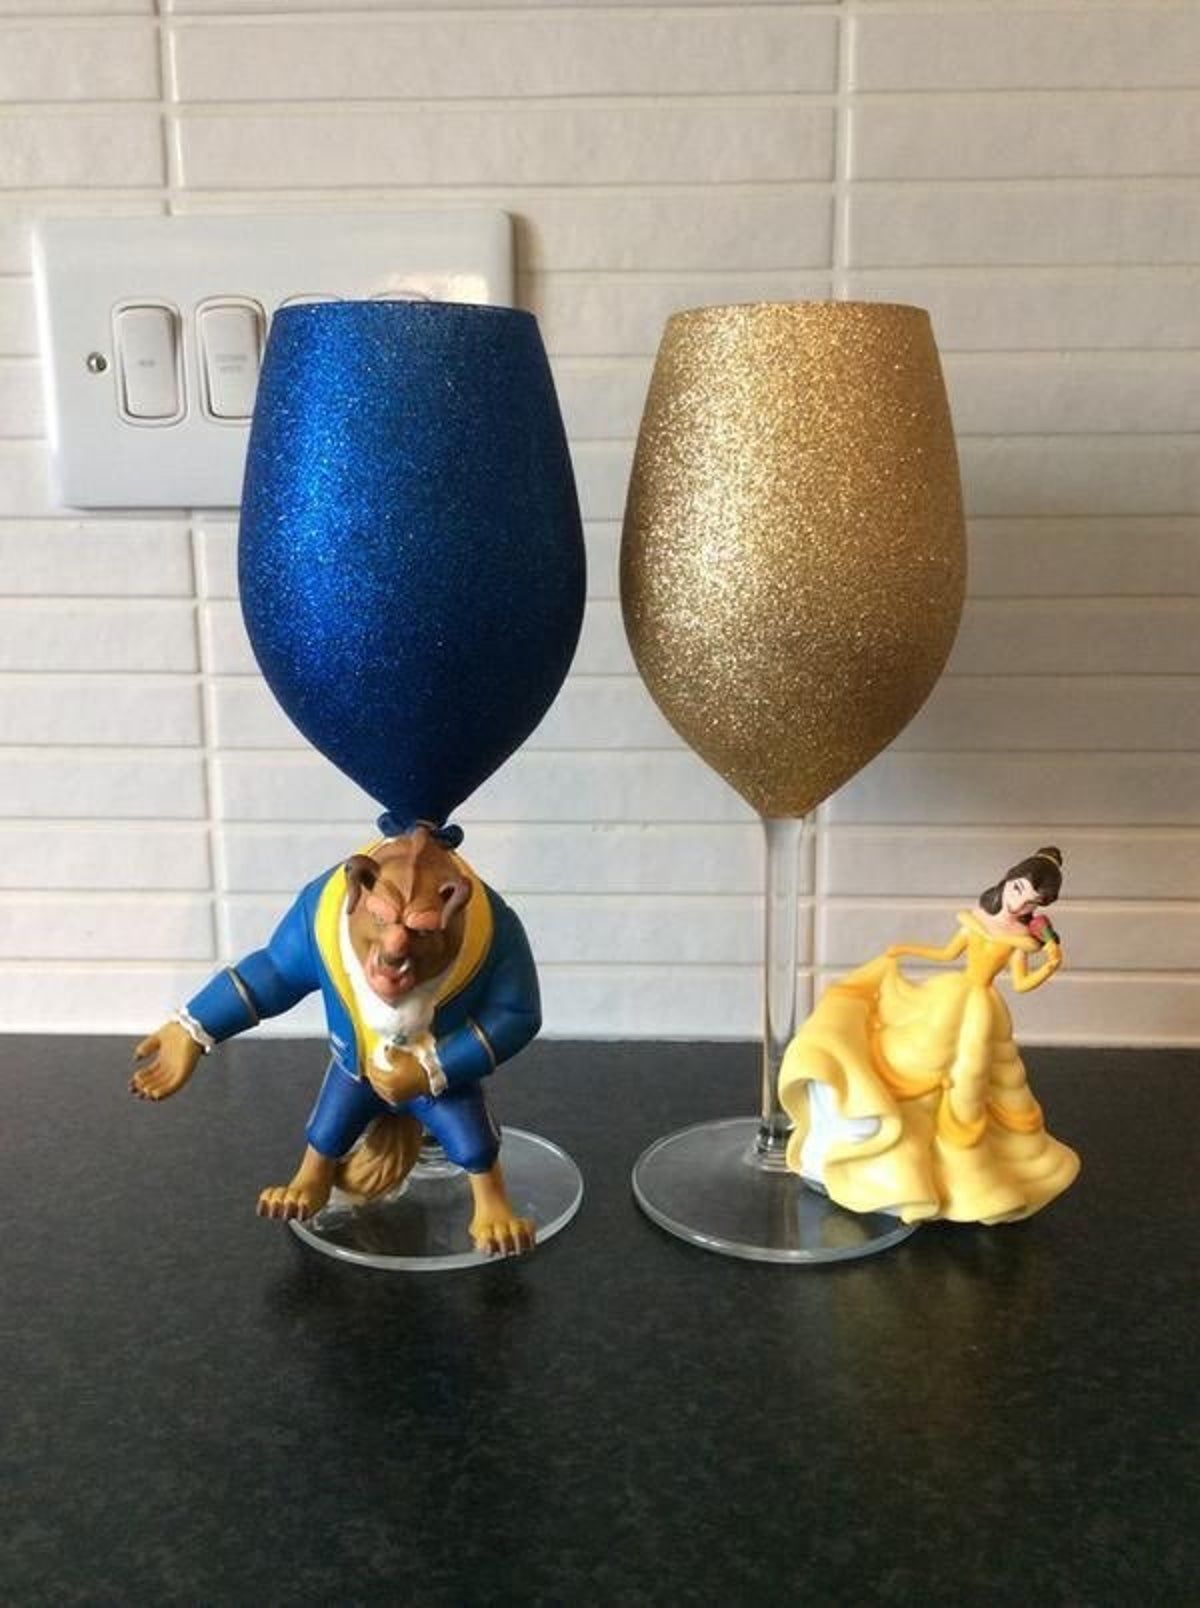 beauty and the beast Wine Glasses on Mercari - beauty and the beast Wine Glasses on Mercari -   18 beauty And The Beast gifts ideas